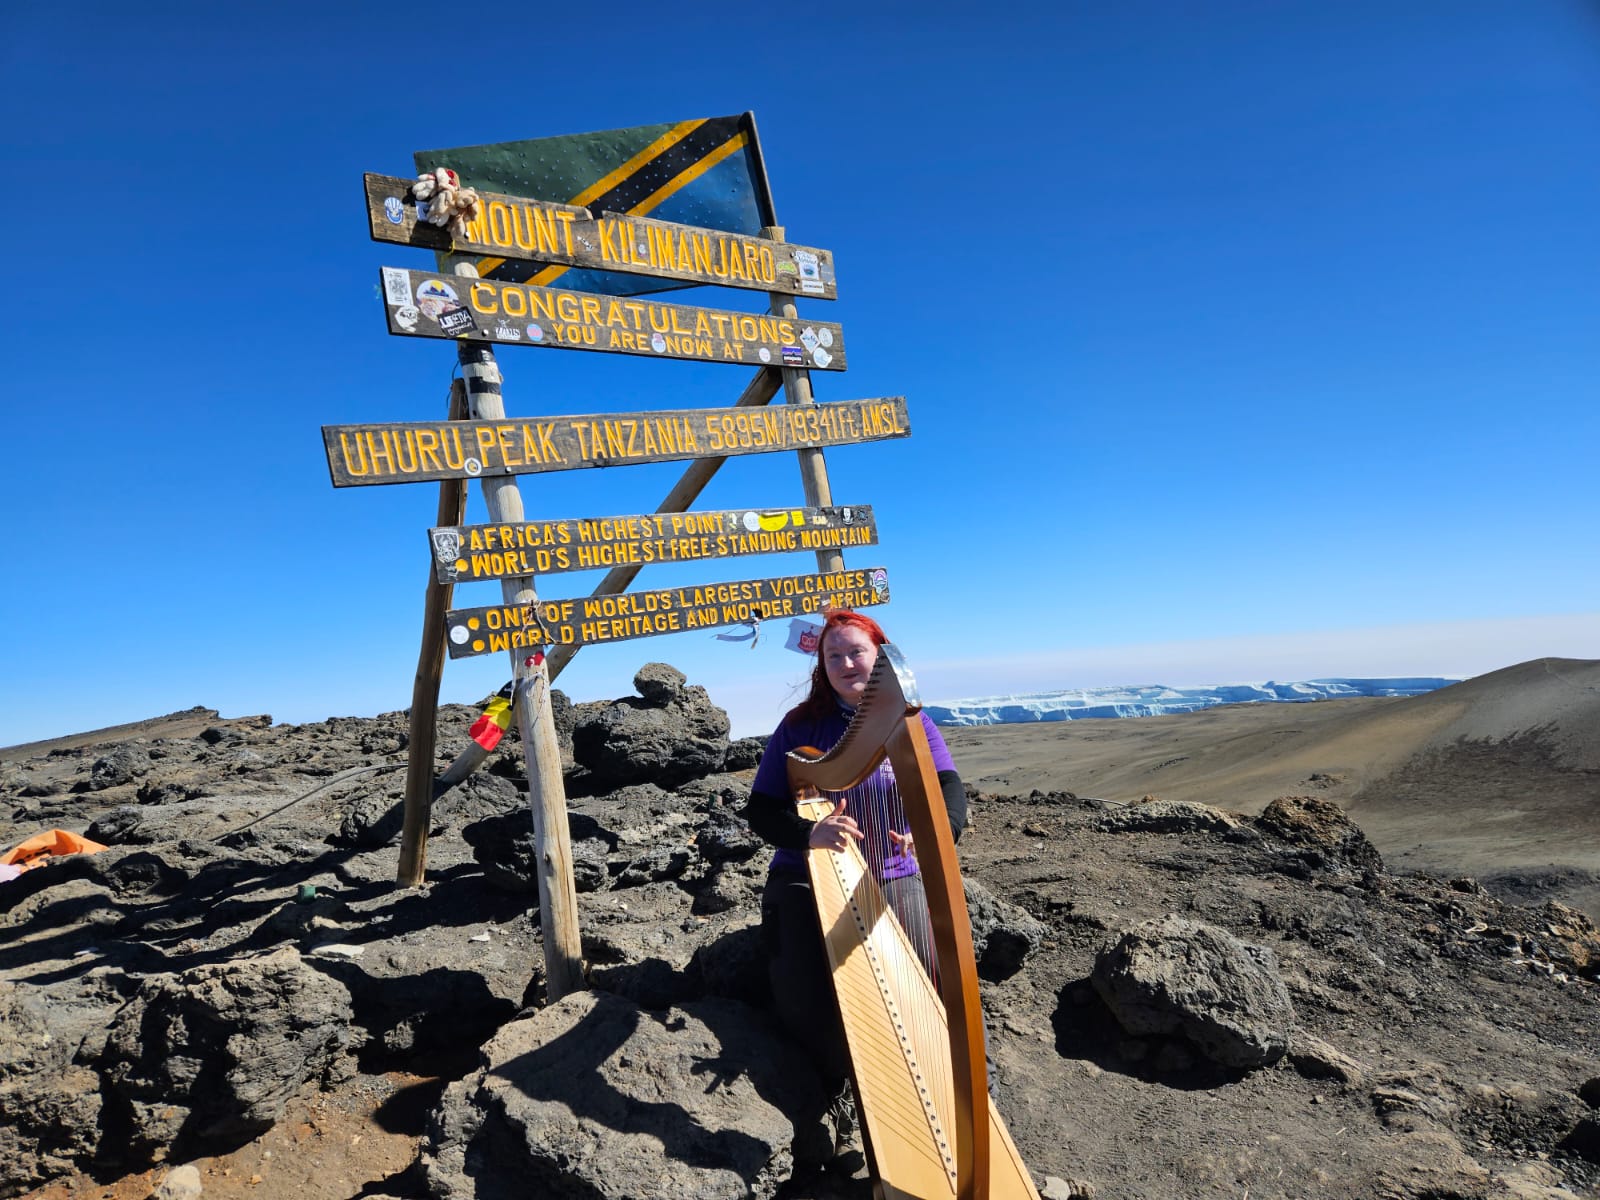 24-year-old Siobhan Brady on the summit of Mount Kilimanjaro on the morning of 25th July 2023, during the Guinness World Record attempt, for the Highest Harp Concert, raising funds for Cystic Fibrosis Ireland.